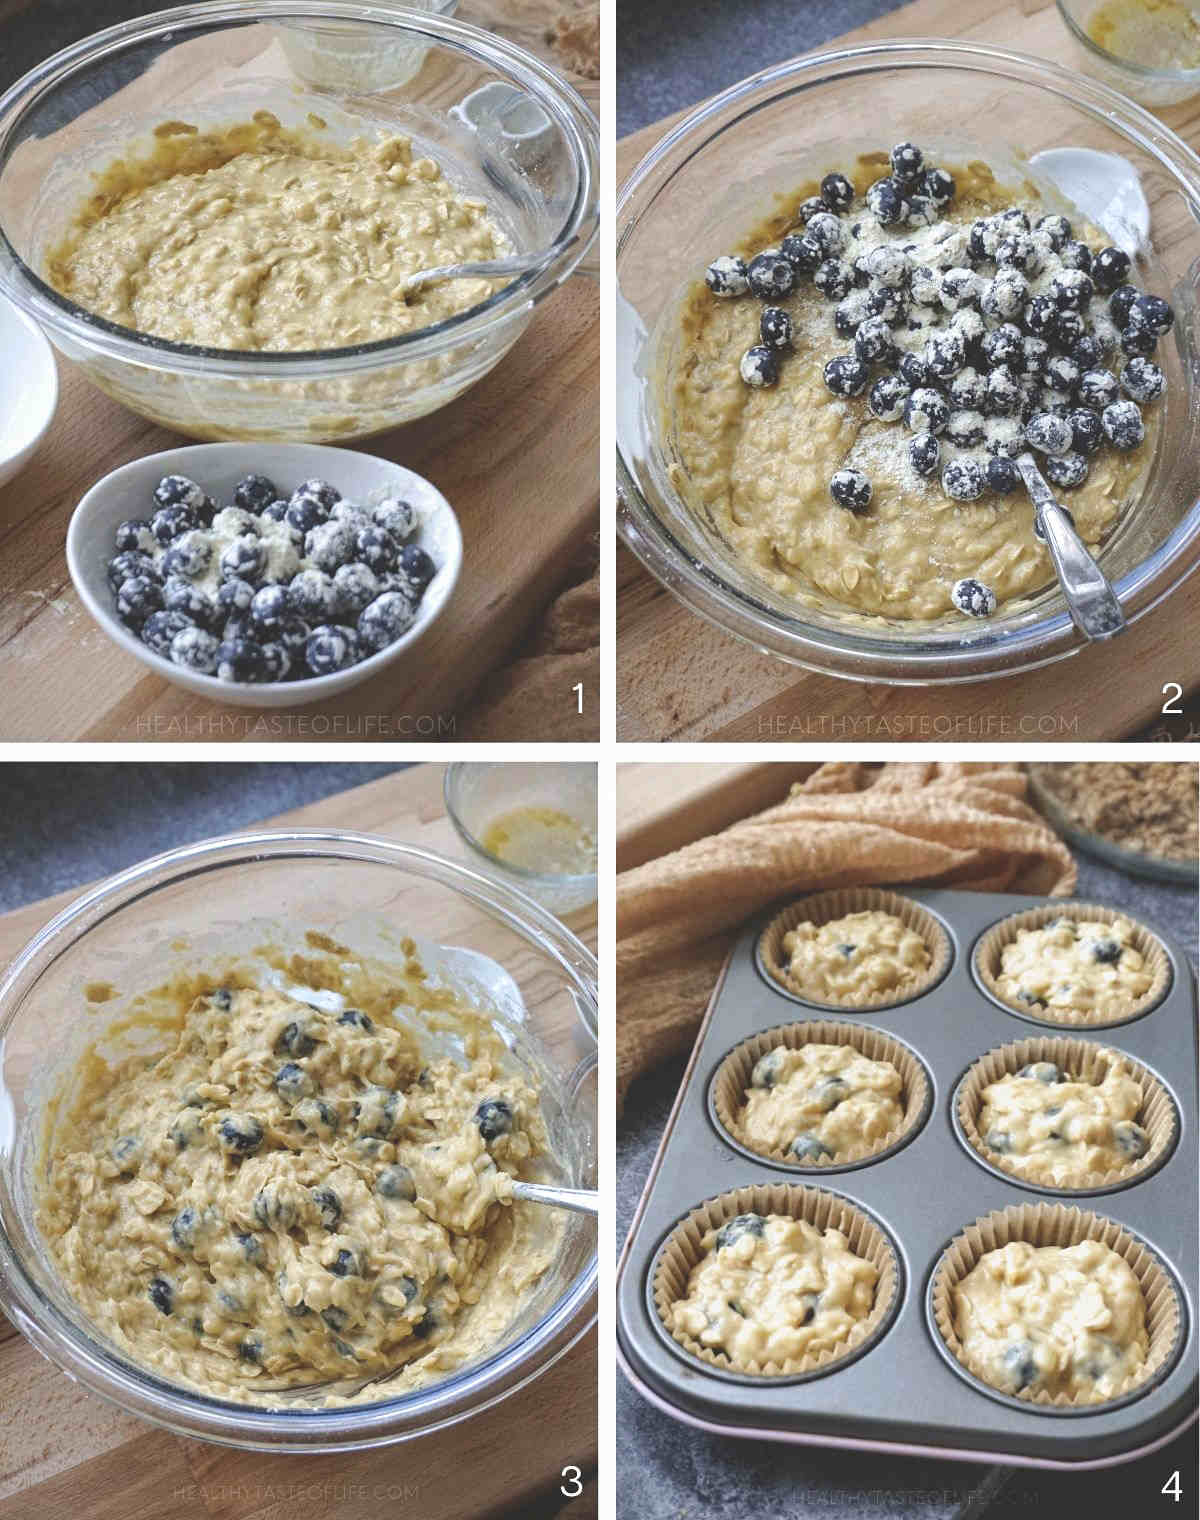 Process shots showing how to mix the dry ingredients for oatmeal blueberry banana muffins batter and divide in muffins pan.